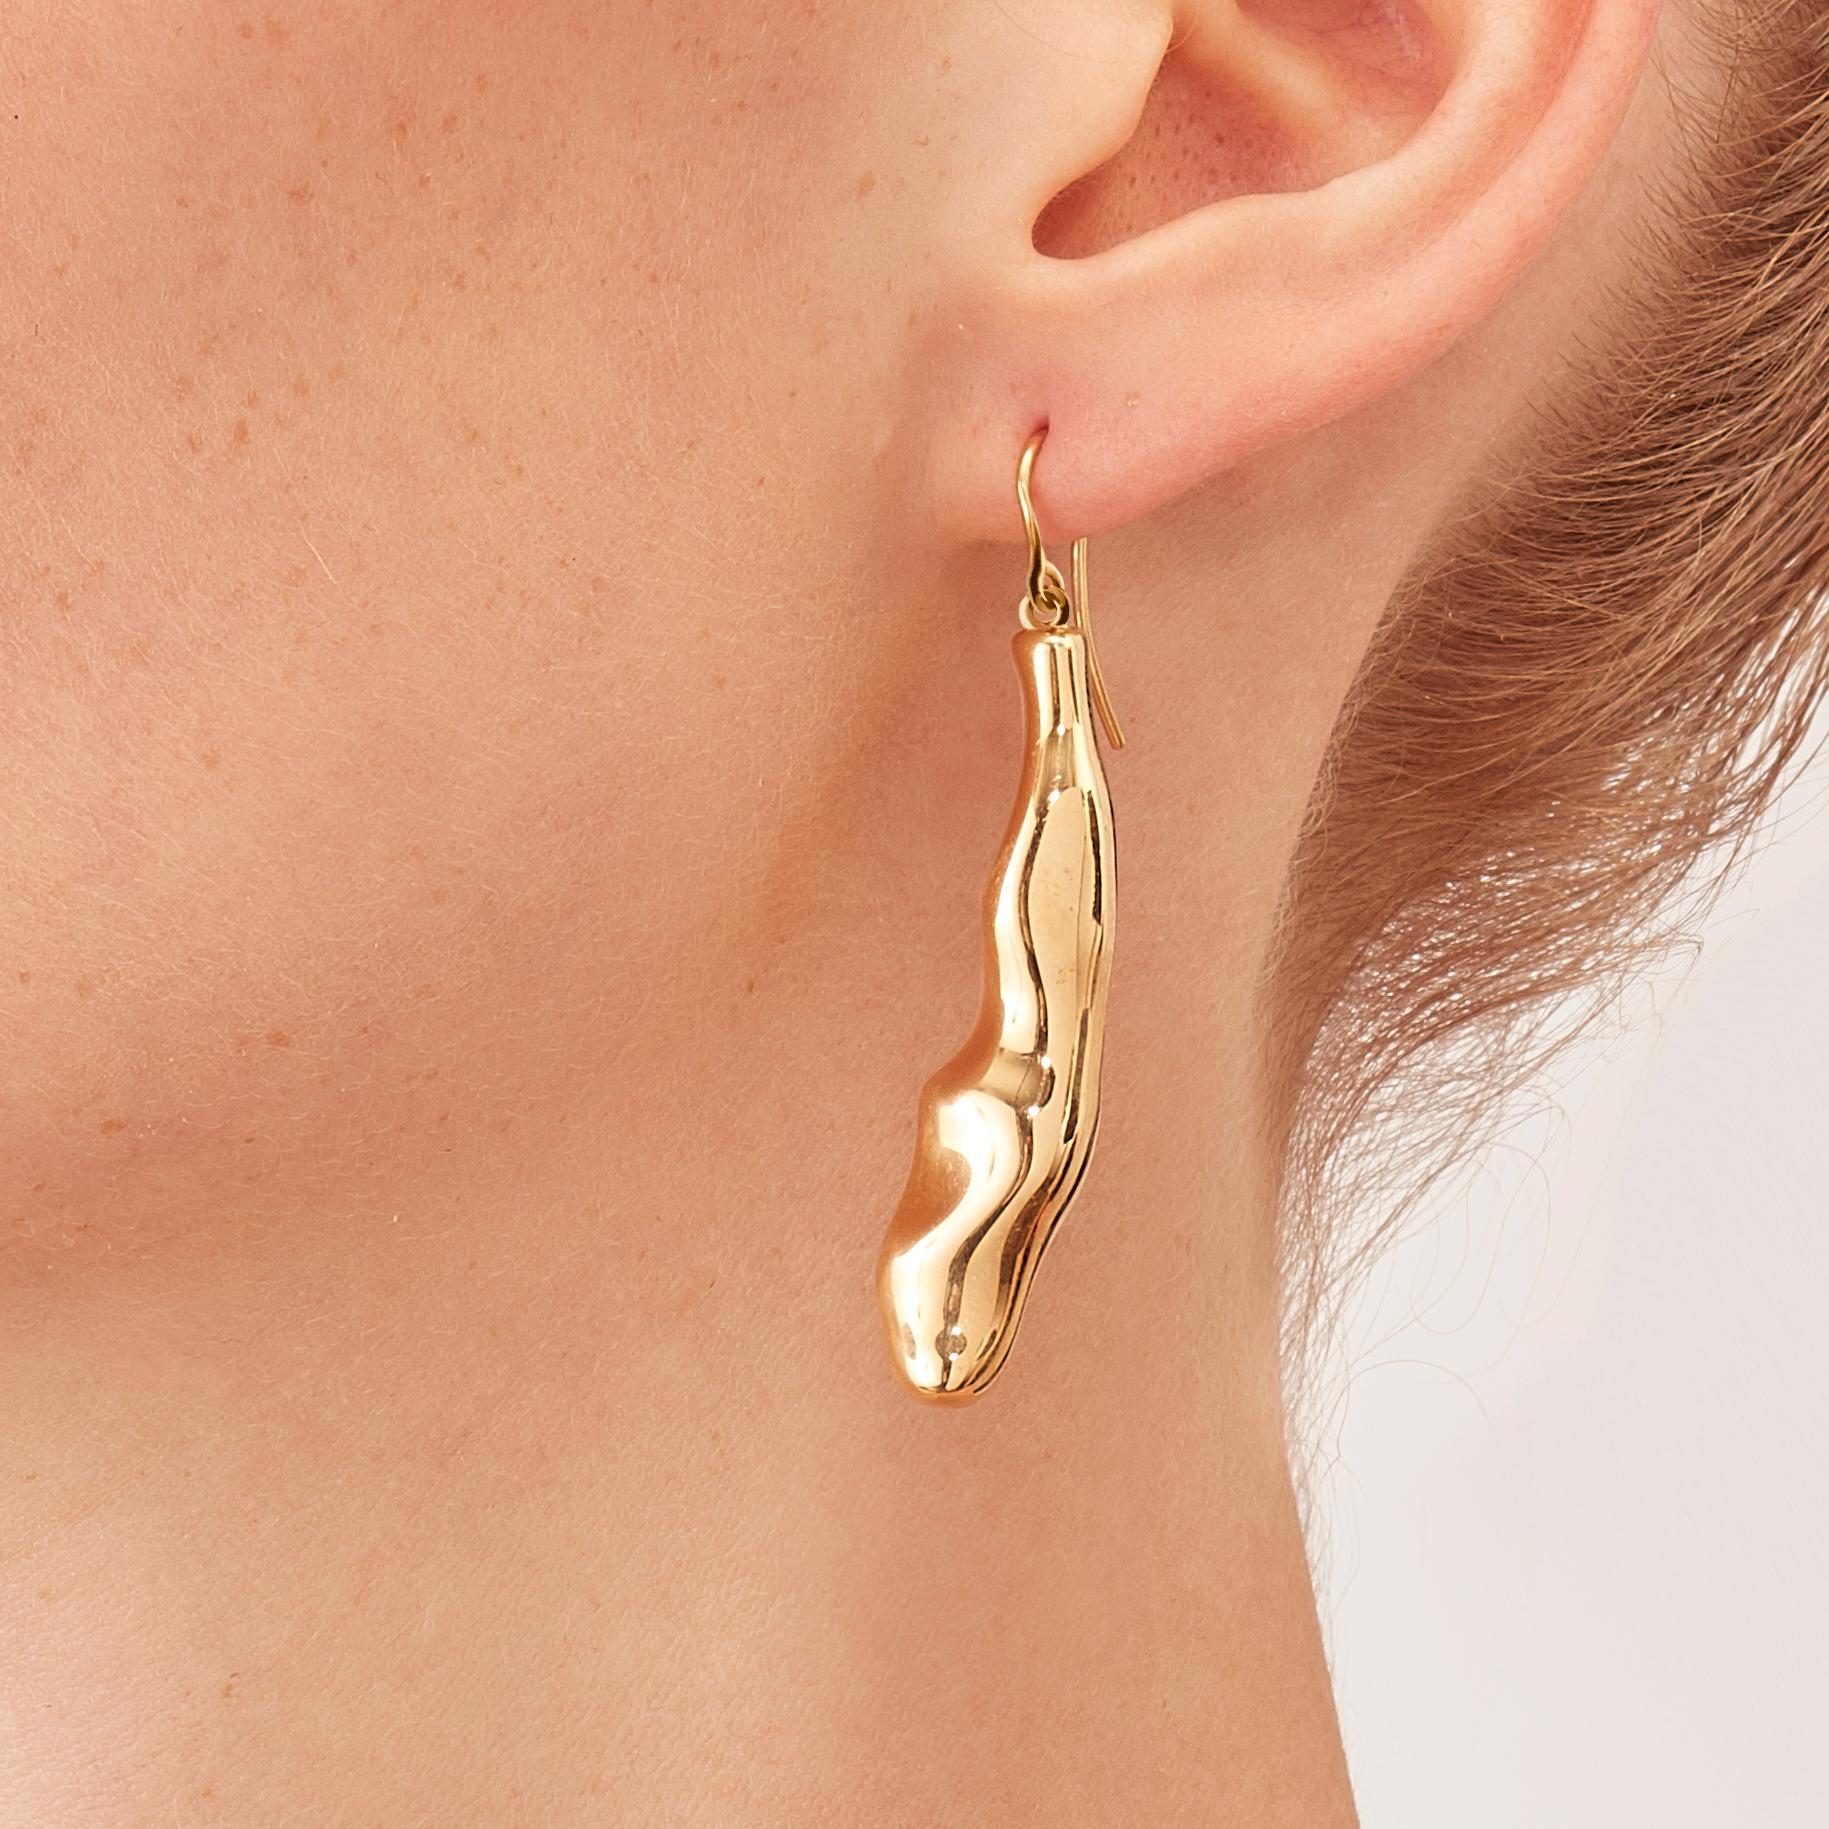 Made by hand in Nathalie Jean's Milan atelier in limited edition, the Mercure Contemporary Drop Dangle Earrings are in 18 karat rosé gold, a warm, sophisticated color close to yellow gold. Small, delicate, ebbing sculptures with seemingly random